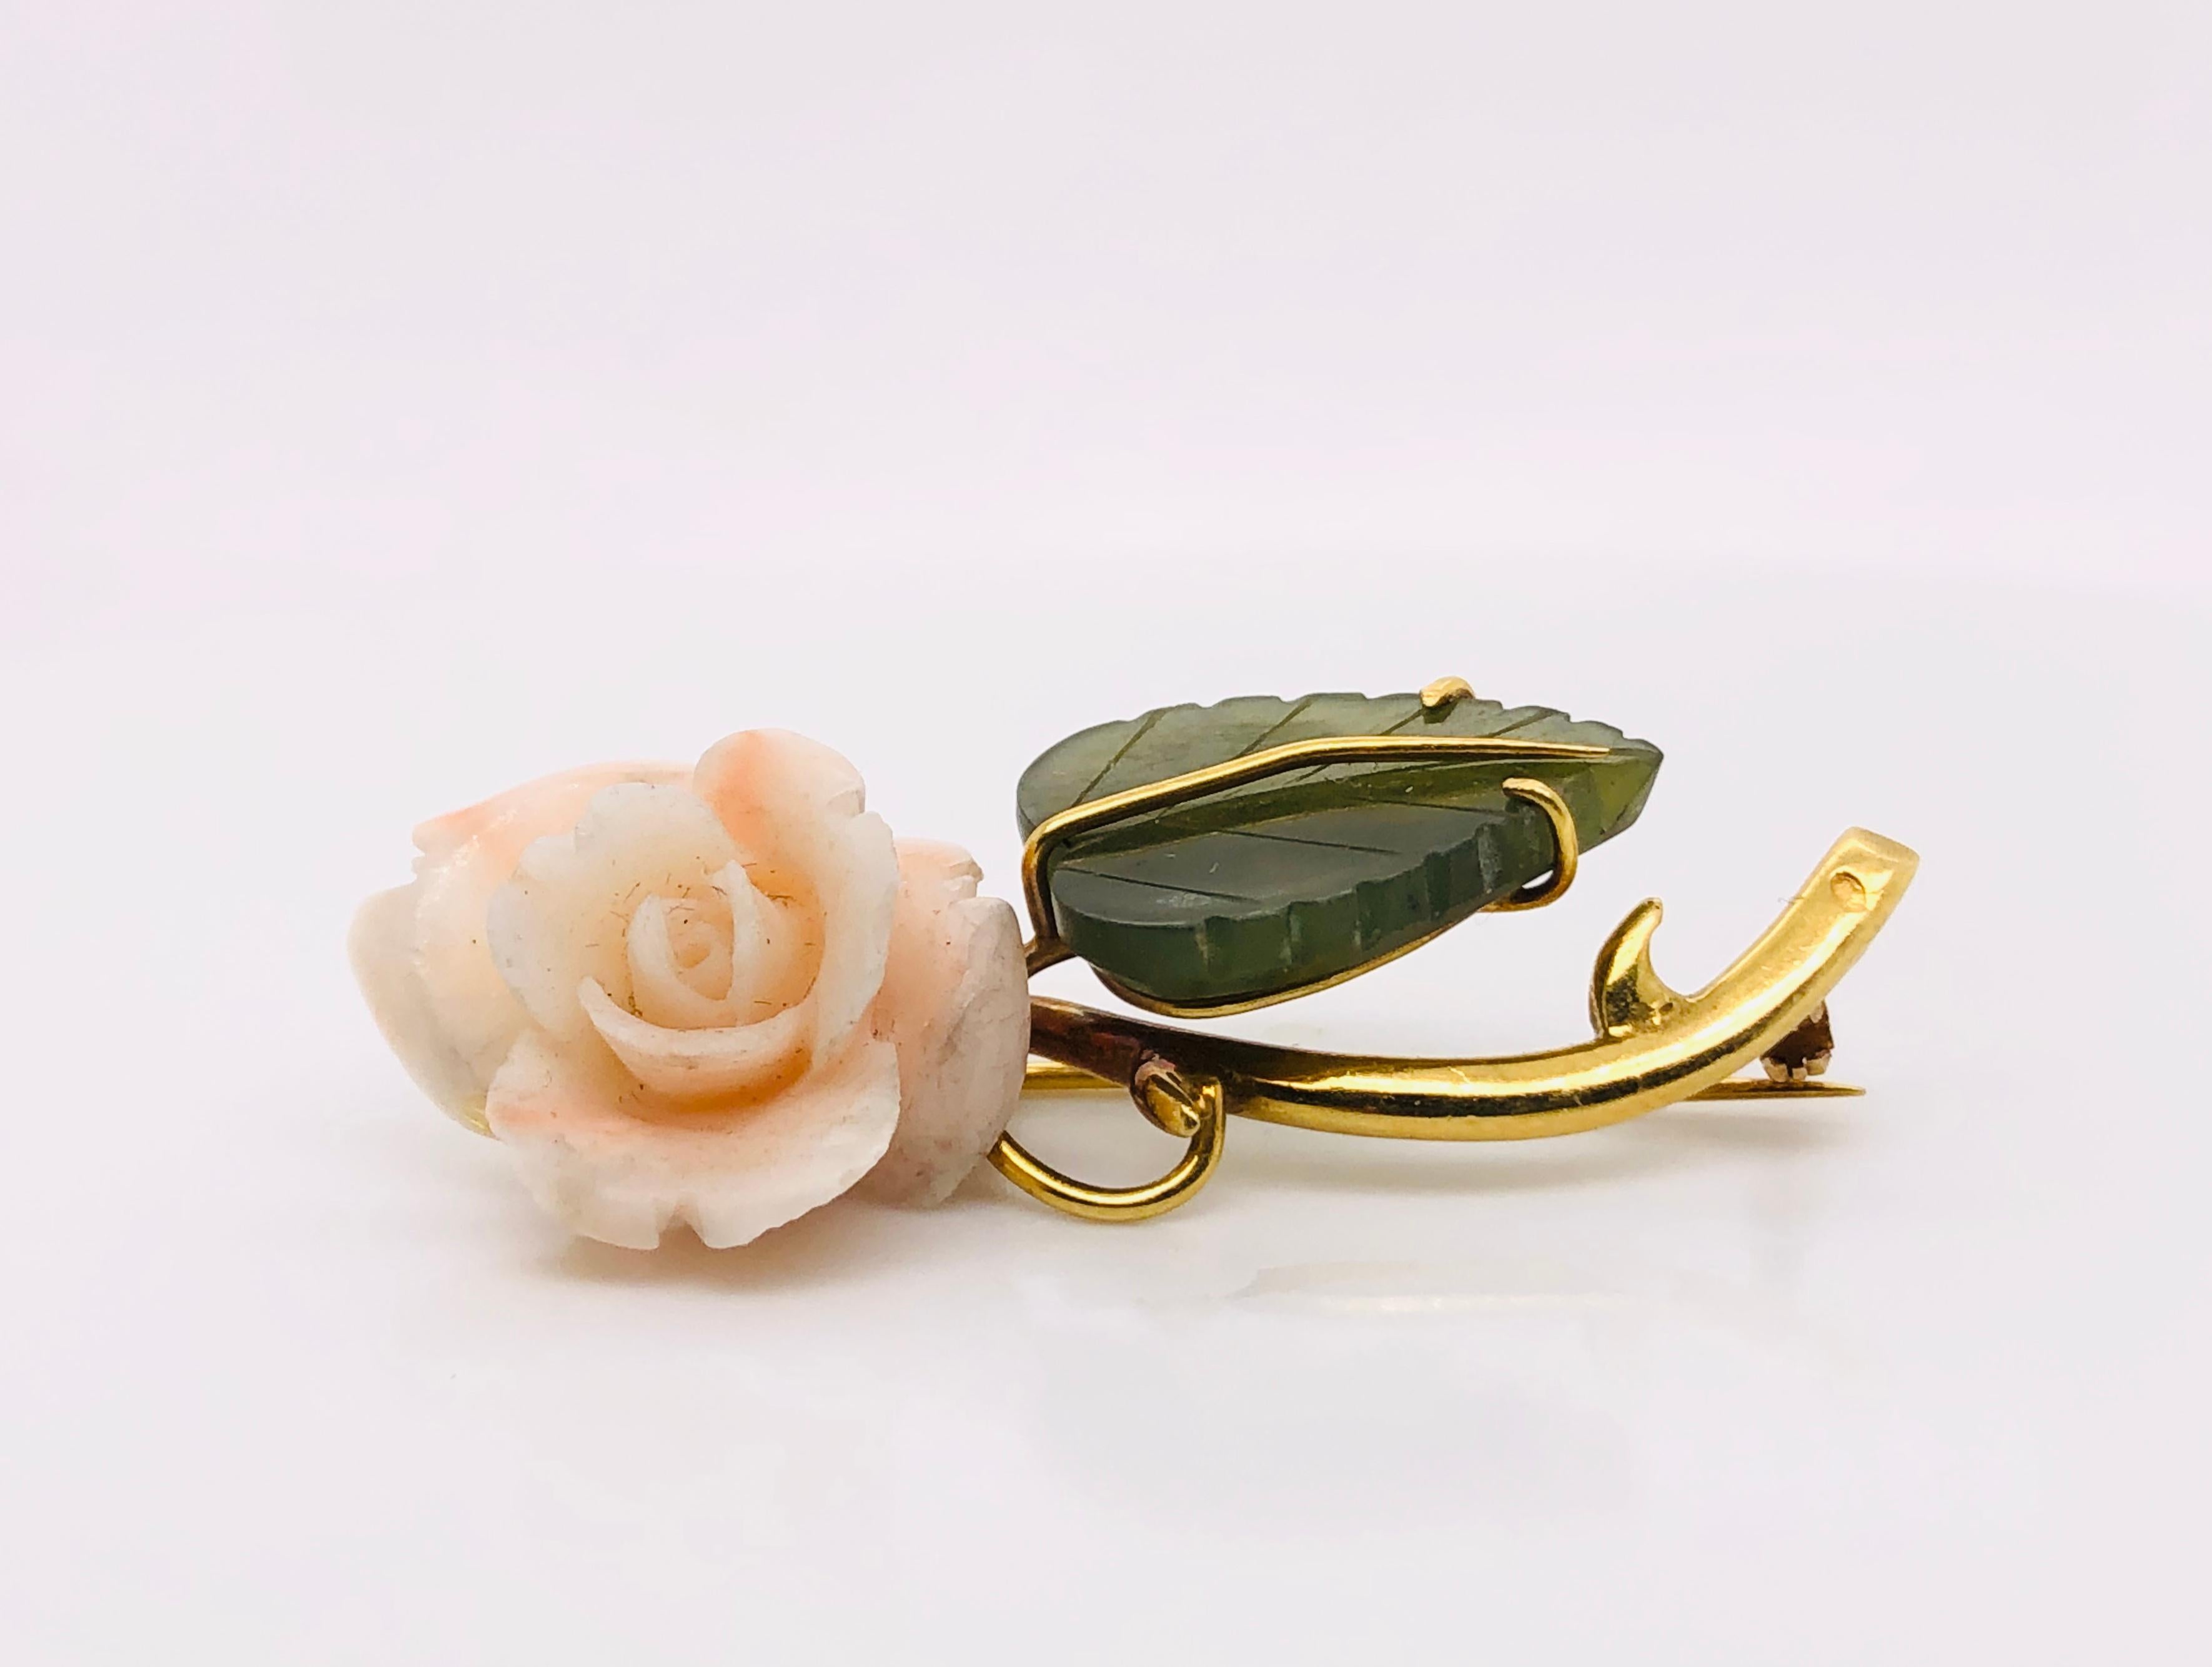 Discover this magnificent floral brooch from the '50s, a true vintage treasure. Crafted from mother-of-pearl and shell, this brooch captures the essence of retro elegance. At the center of the brooch is a stunning leaf-shaped green agate, delicately